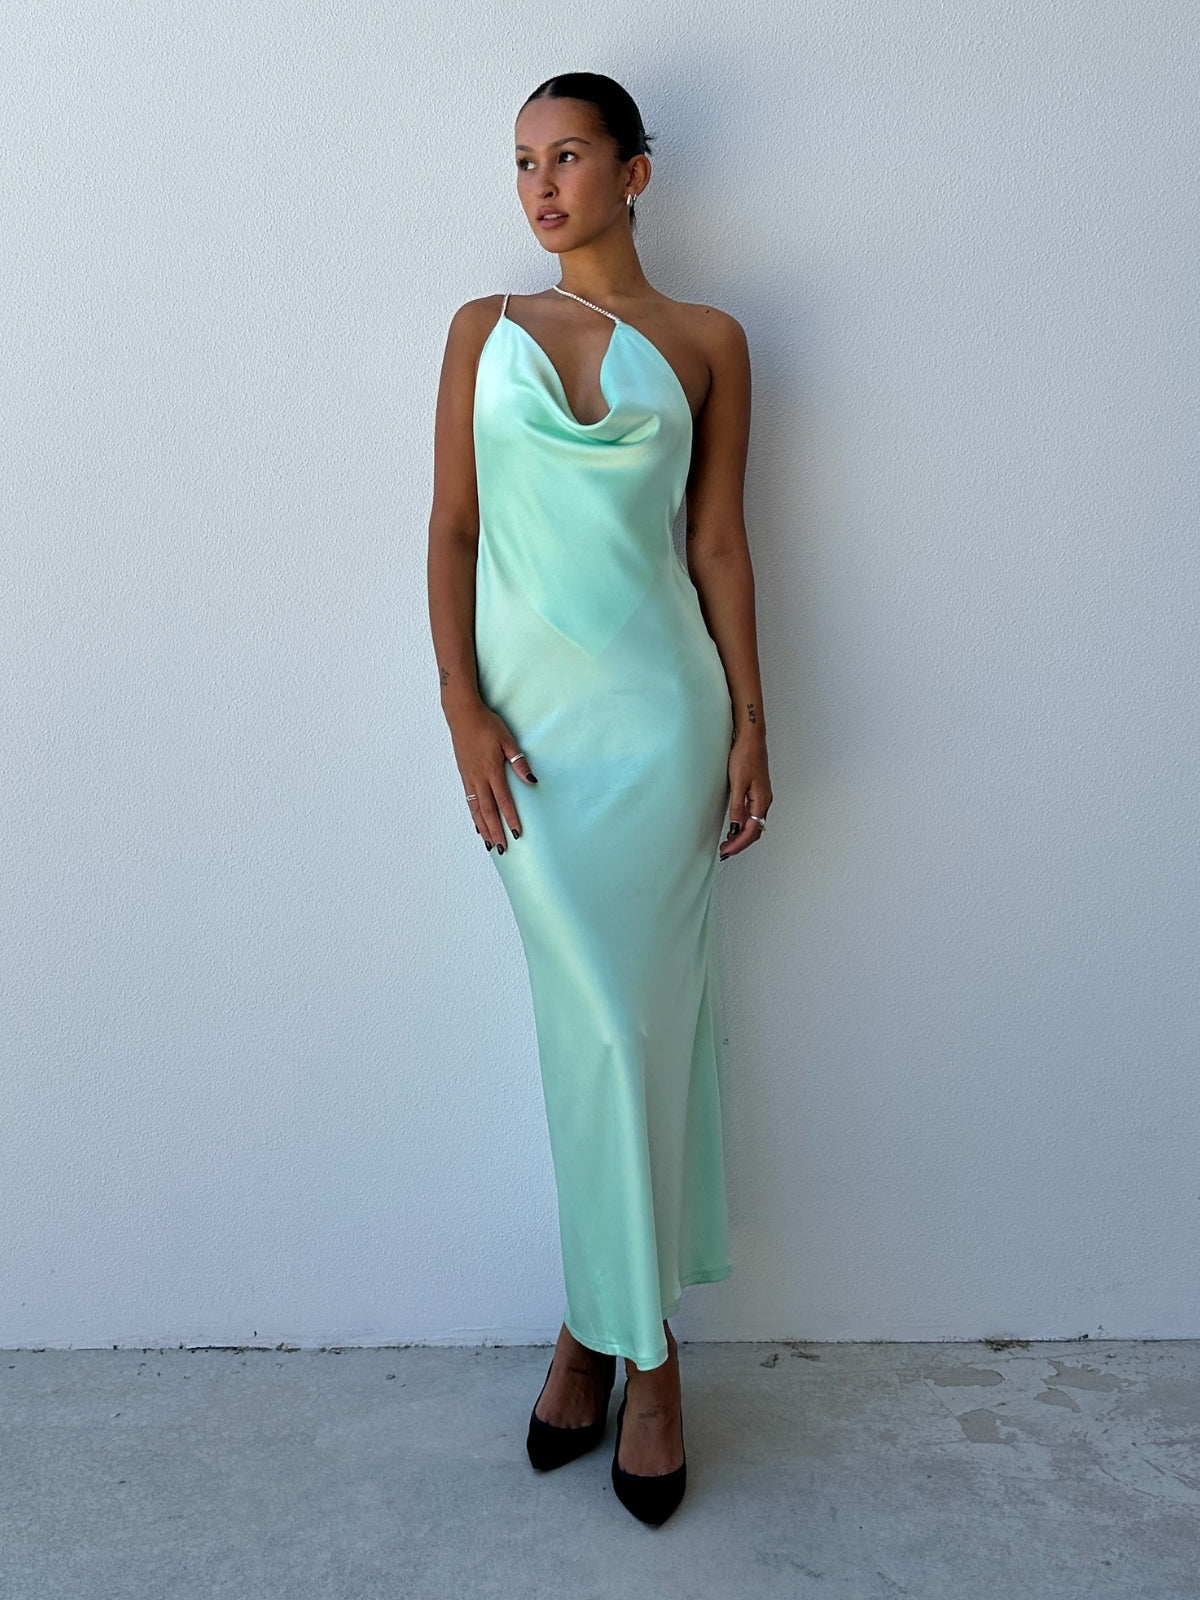 Ella Made | Beverly May Gown - Aqua | Loan That Label